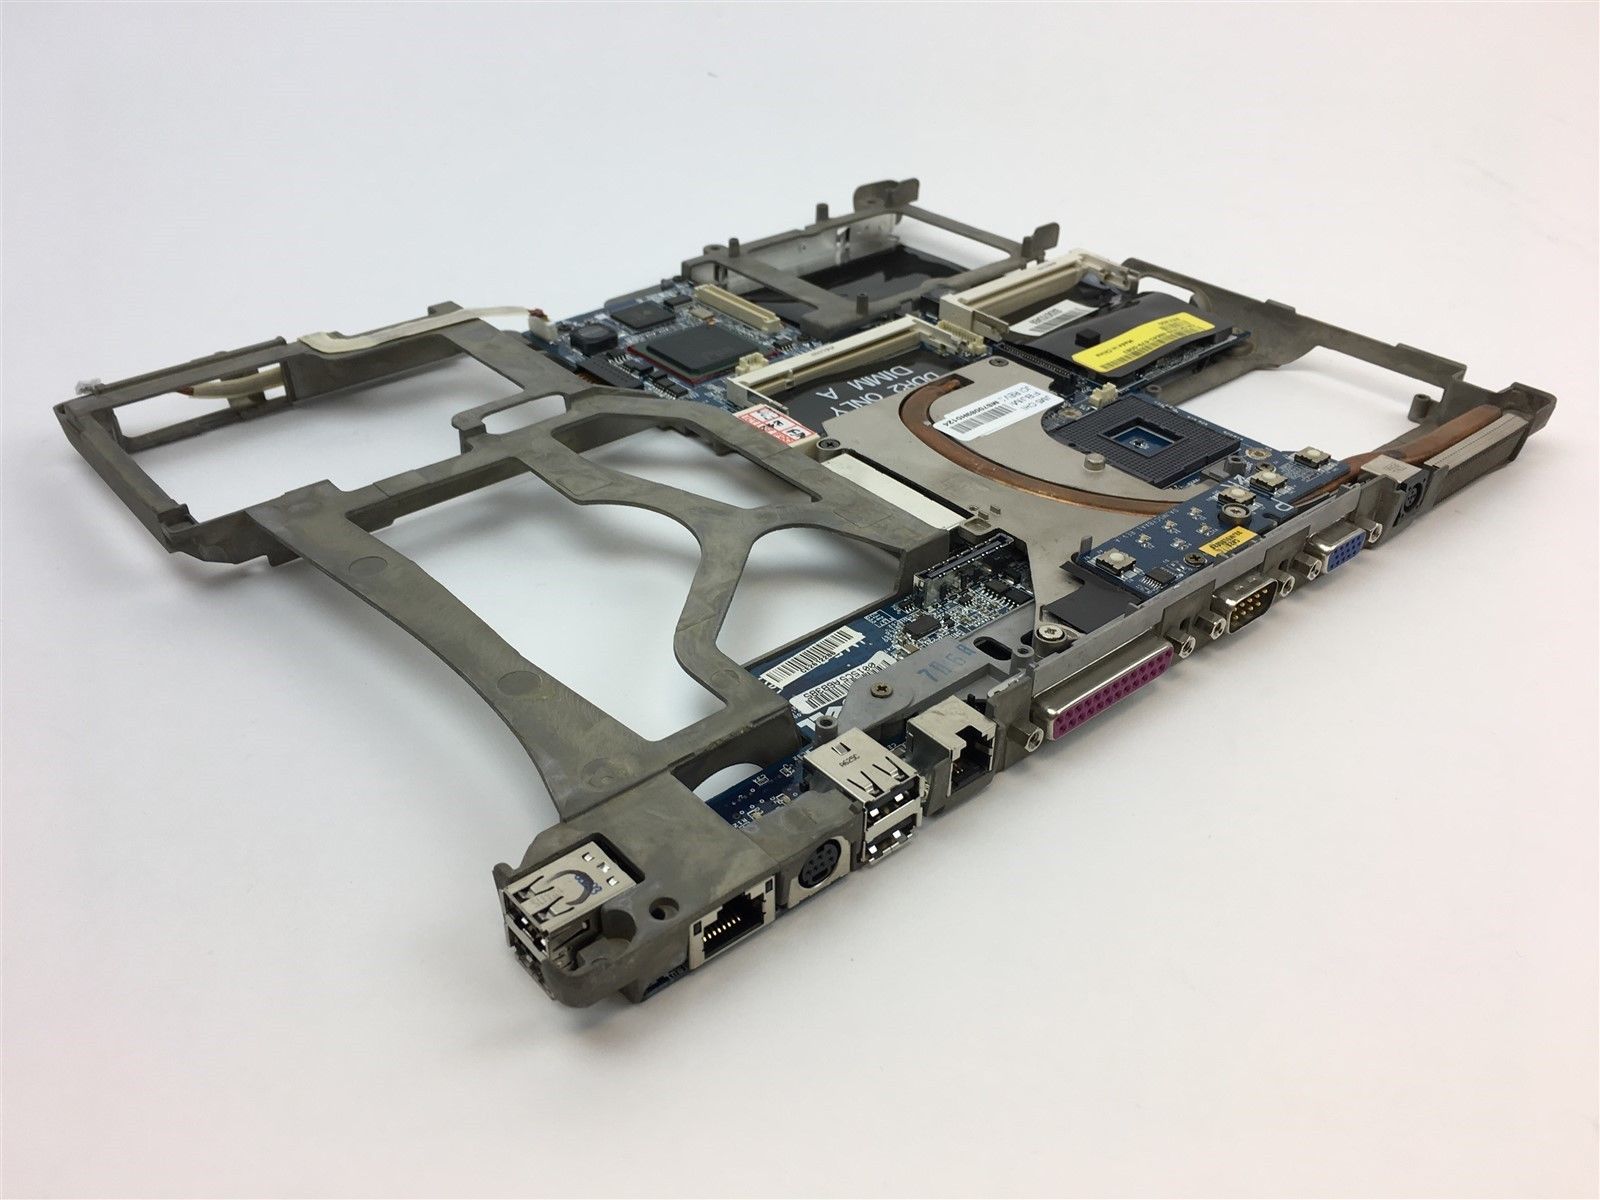 Dell Latitude Laptop Motherboard Intel with Tray D4572 0D4572